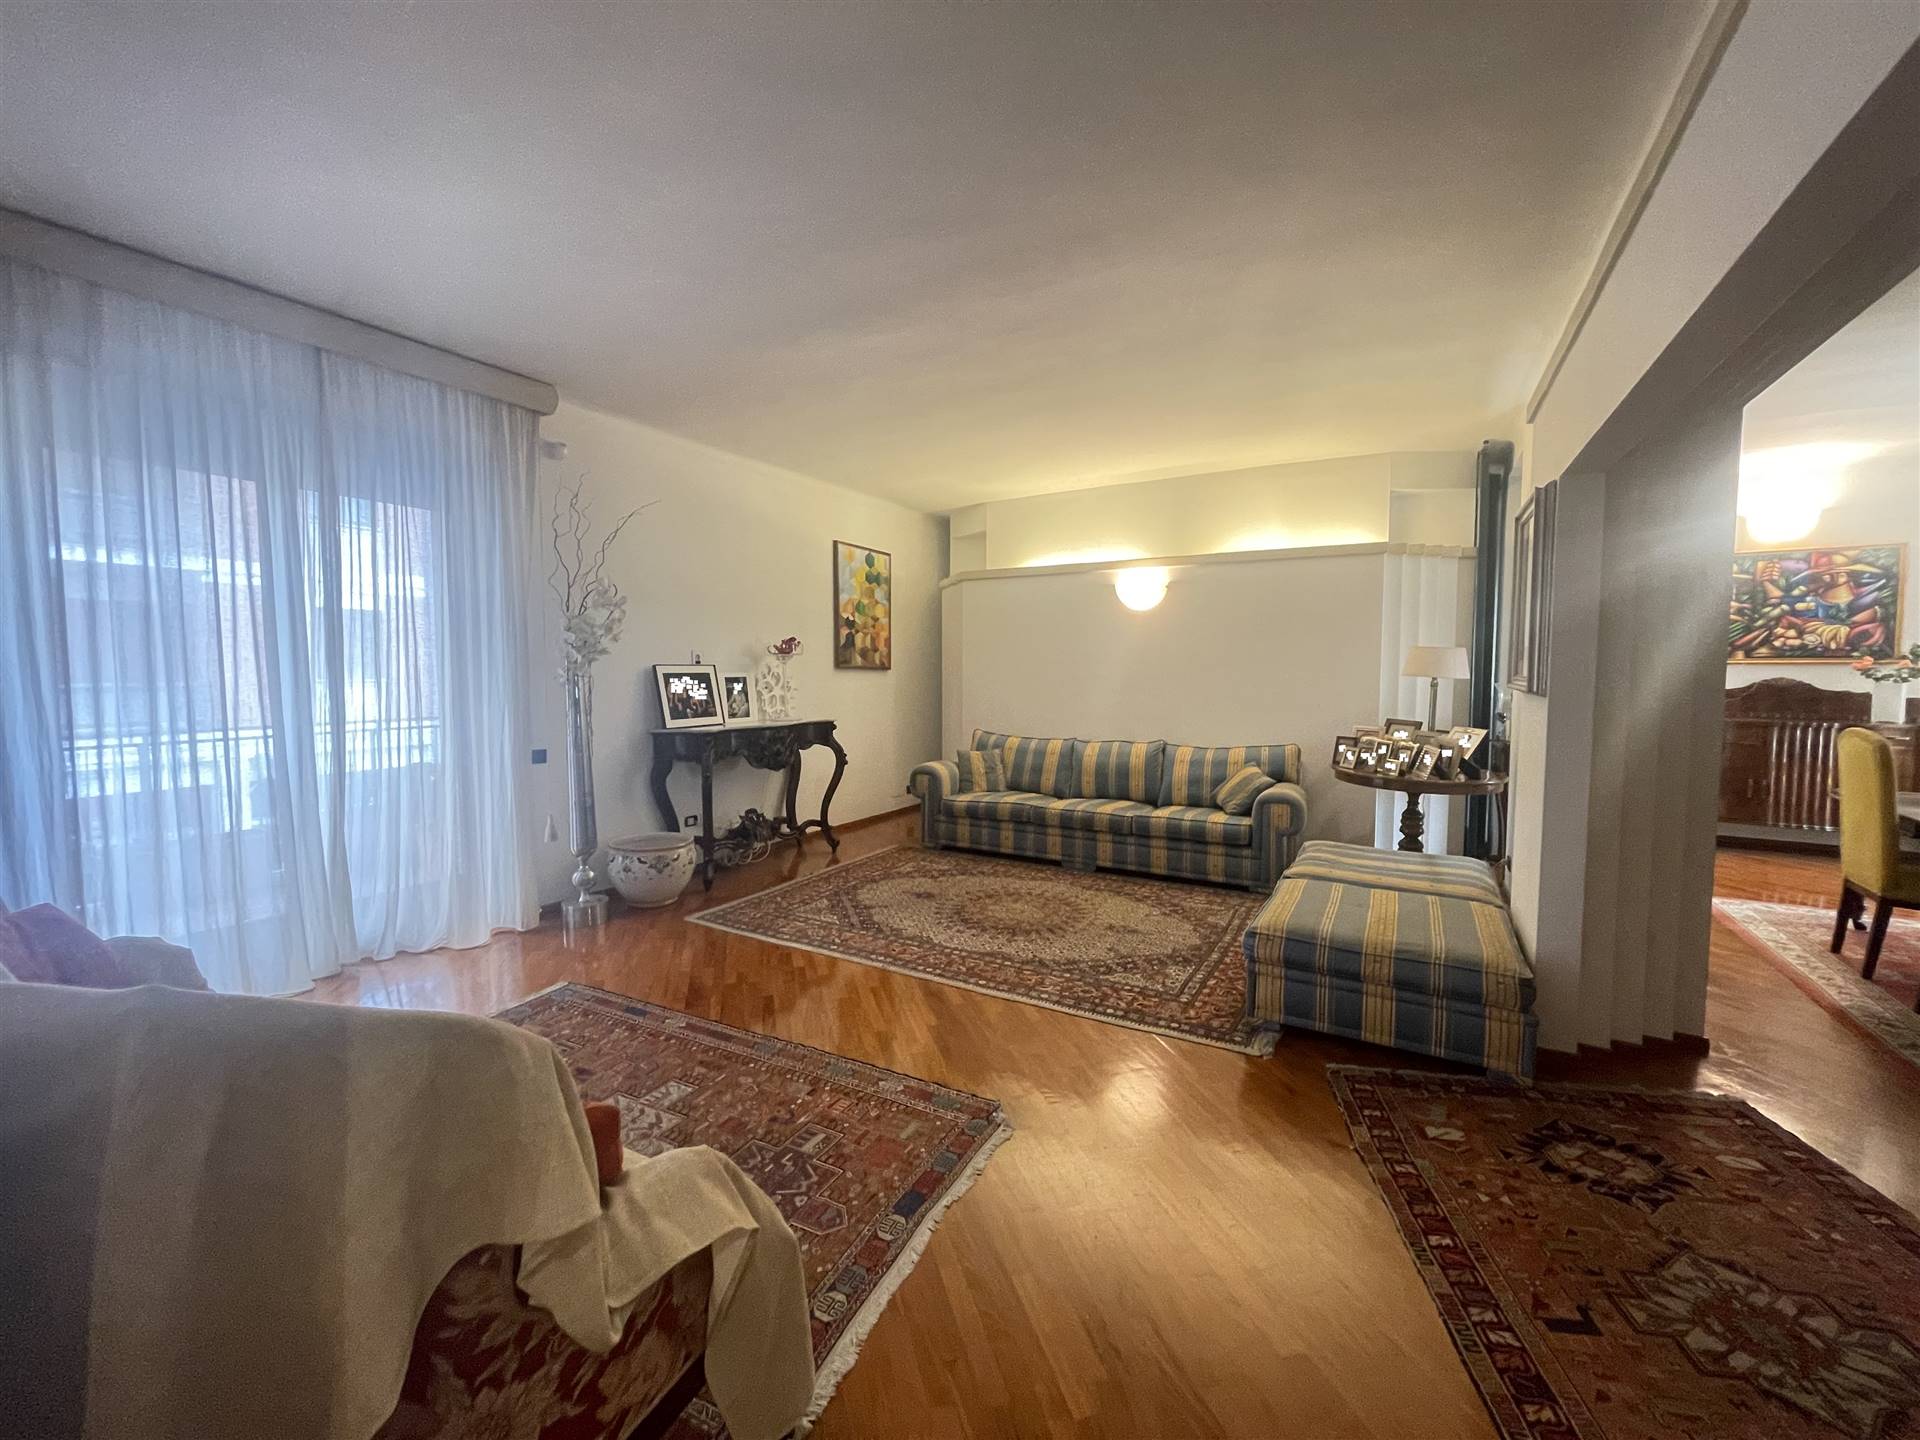 MAZZINI, LECCE, Apartment for sale of 220 Sq. mt., Excellent Condition, Heating Individual heating system, Energetic class: G, Epi: 111,2 kwh/m2 year,